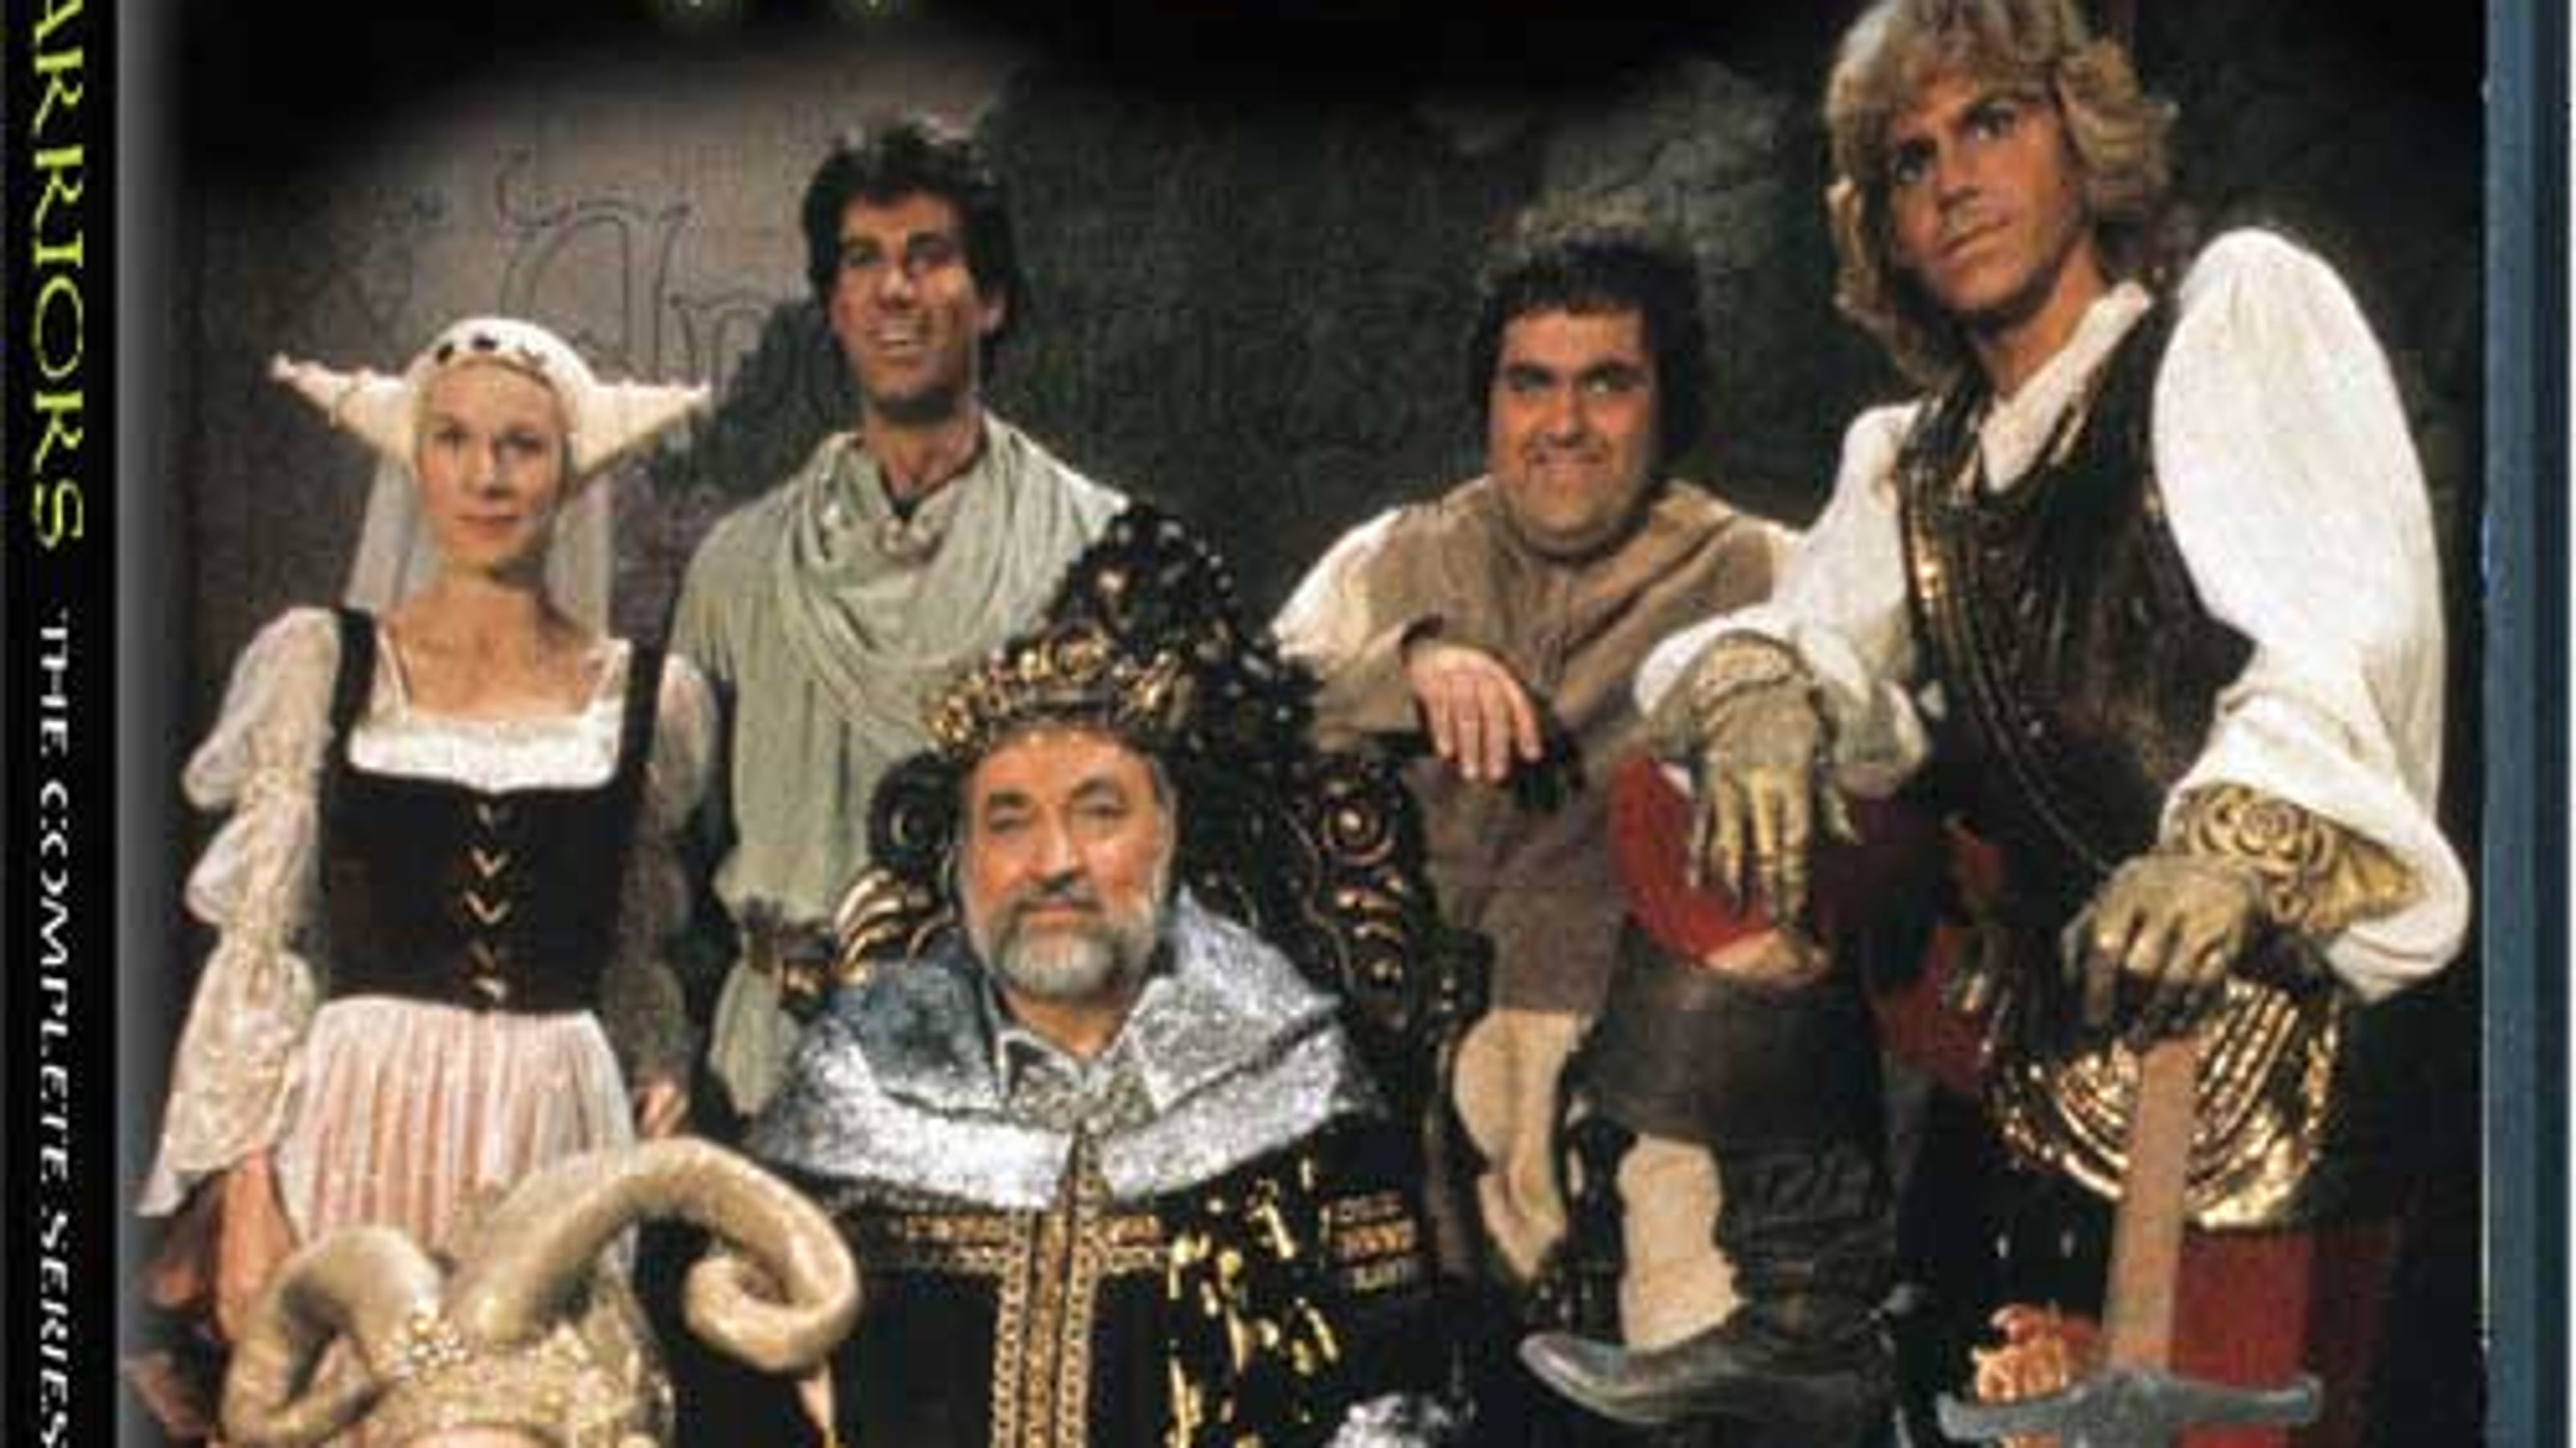 'Wizards and Warriors': Cult '80s TV series comes to DVD3200 x 1800